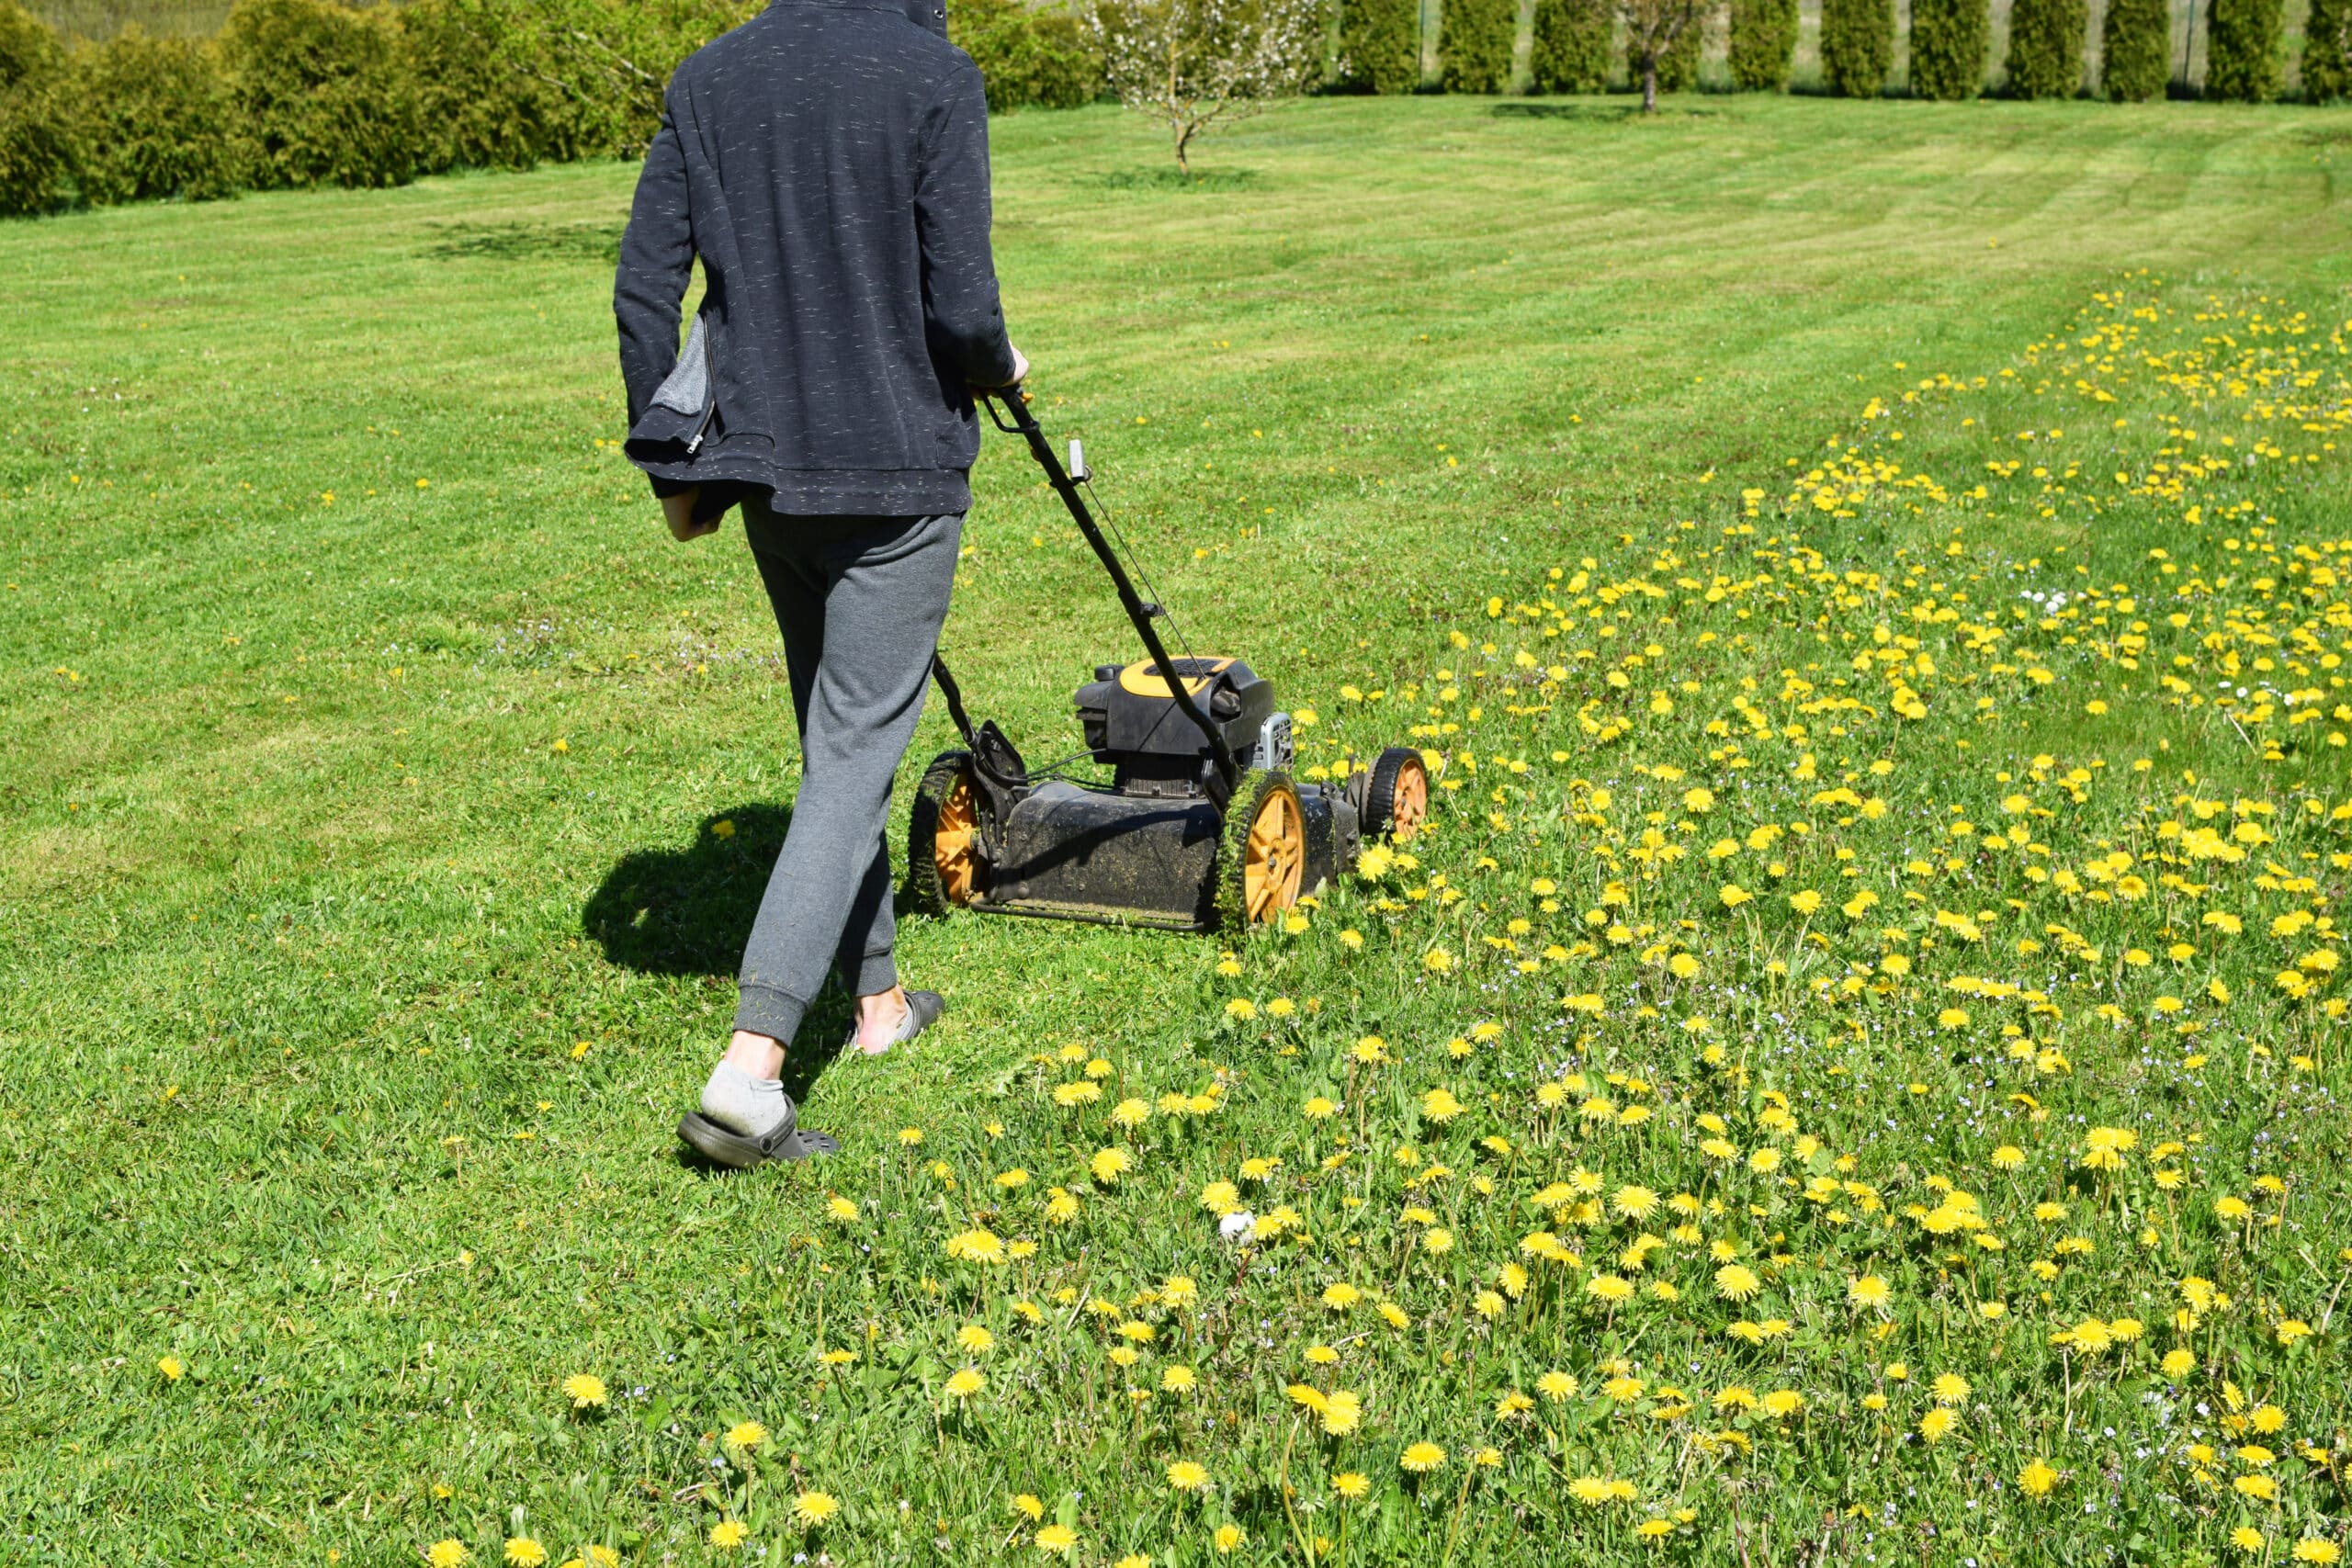 Teen boy mowing lawn grass in yard with lawnmower decorative plants thuja hedge on background in sunny summer day. Dandelions blooming.Children helping in householding and seasonal garden work concept